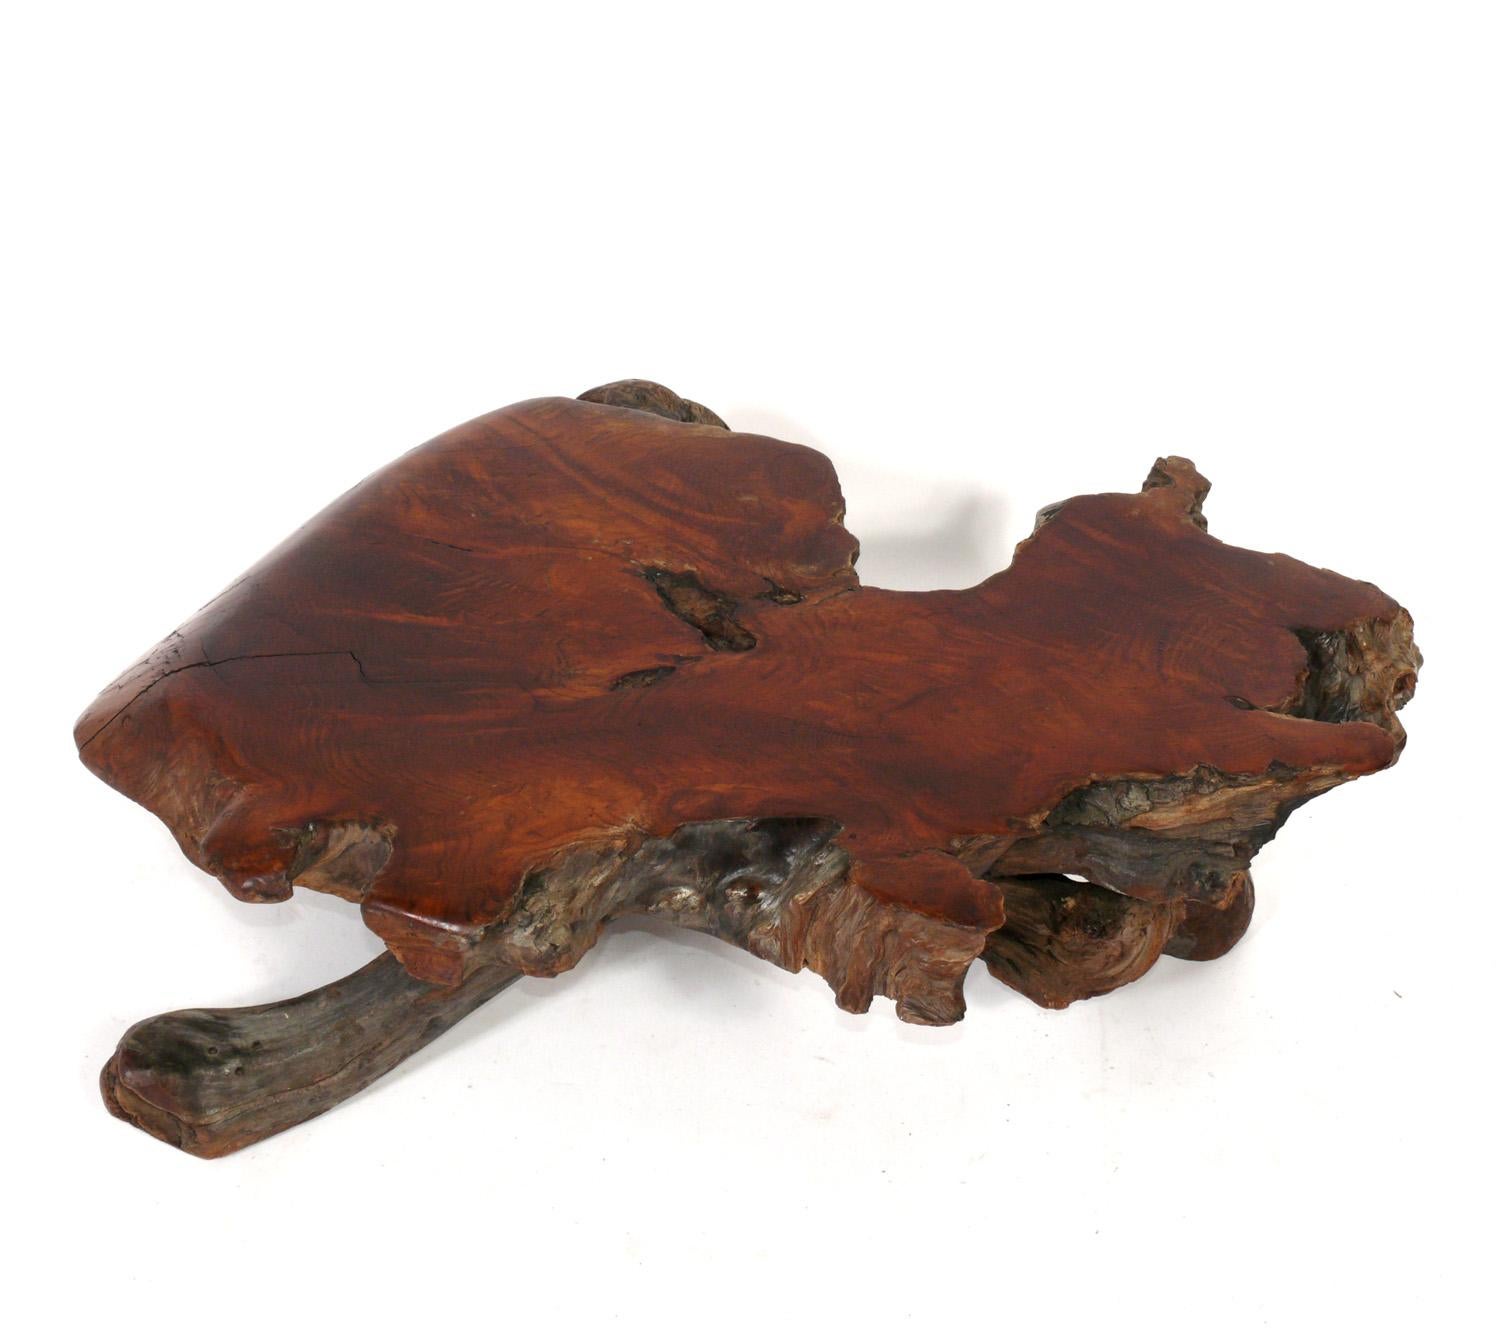 Japanese style low slung burl wood coffee table, probably American, circa 1950s. We believe it is constructed out of redwood and other solid woods. Versatile size can be used as a coffee table, side or end table, or display table. Retains warm